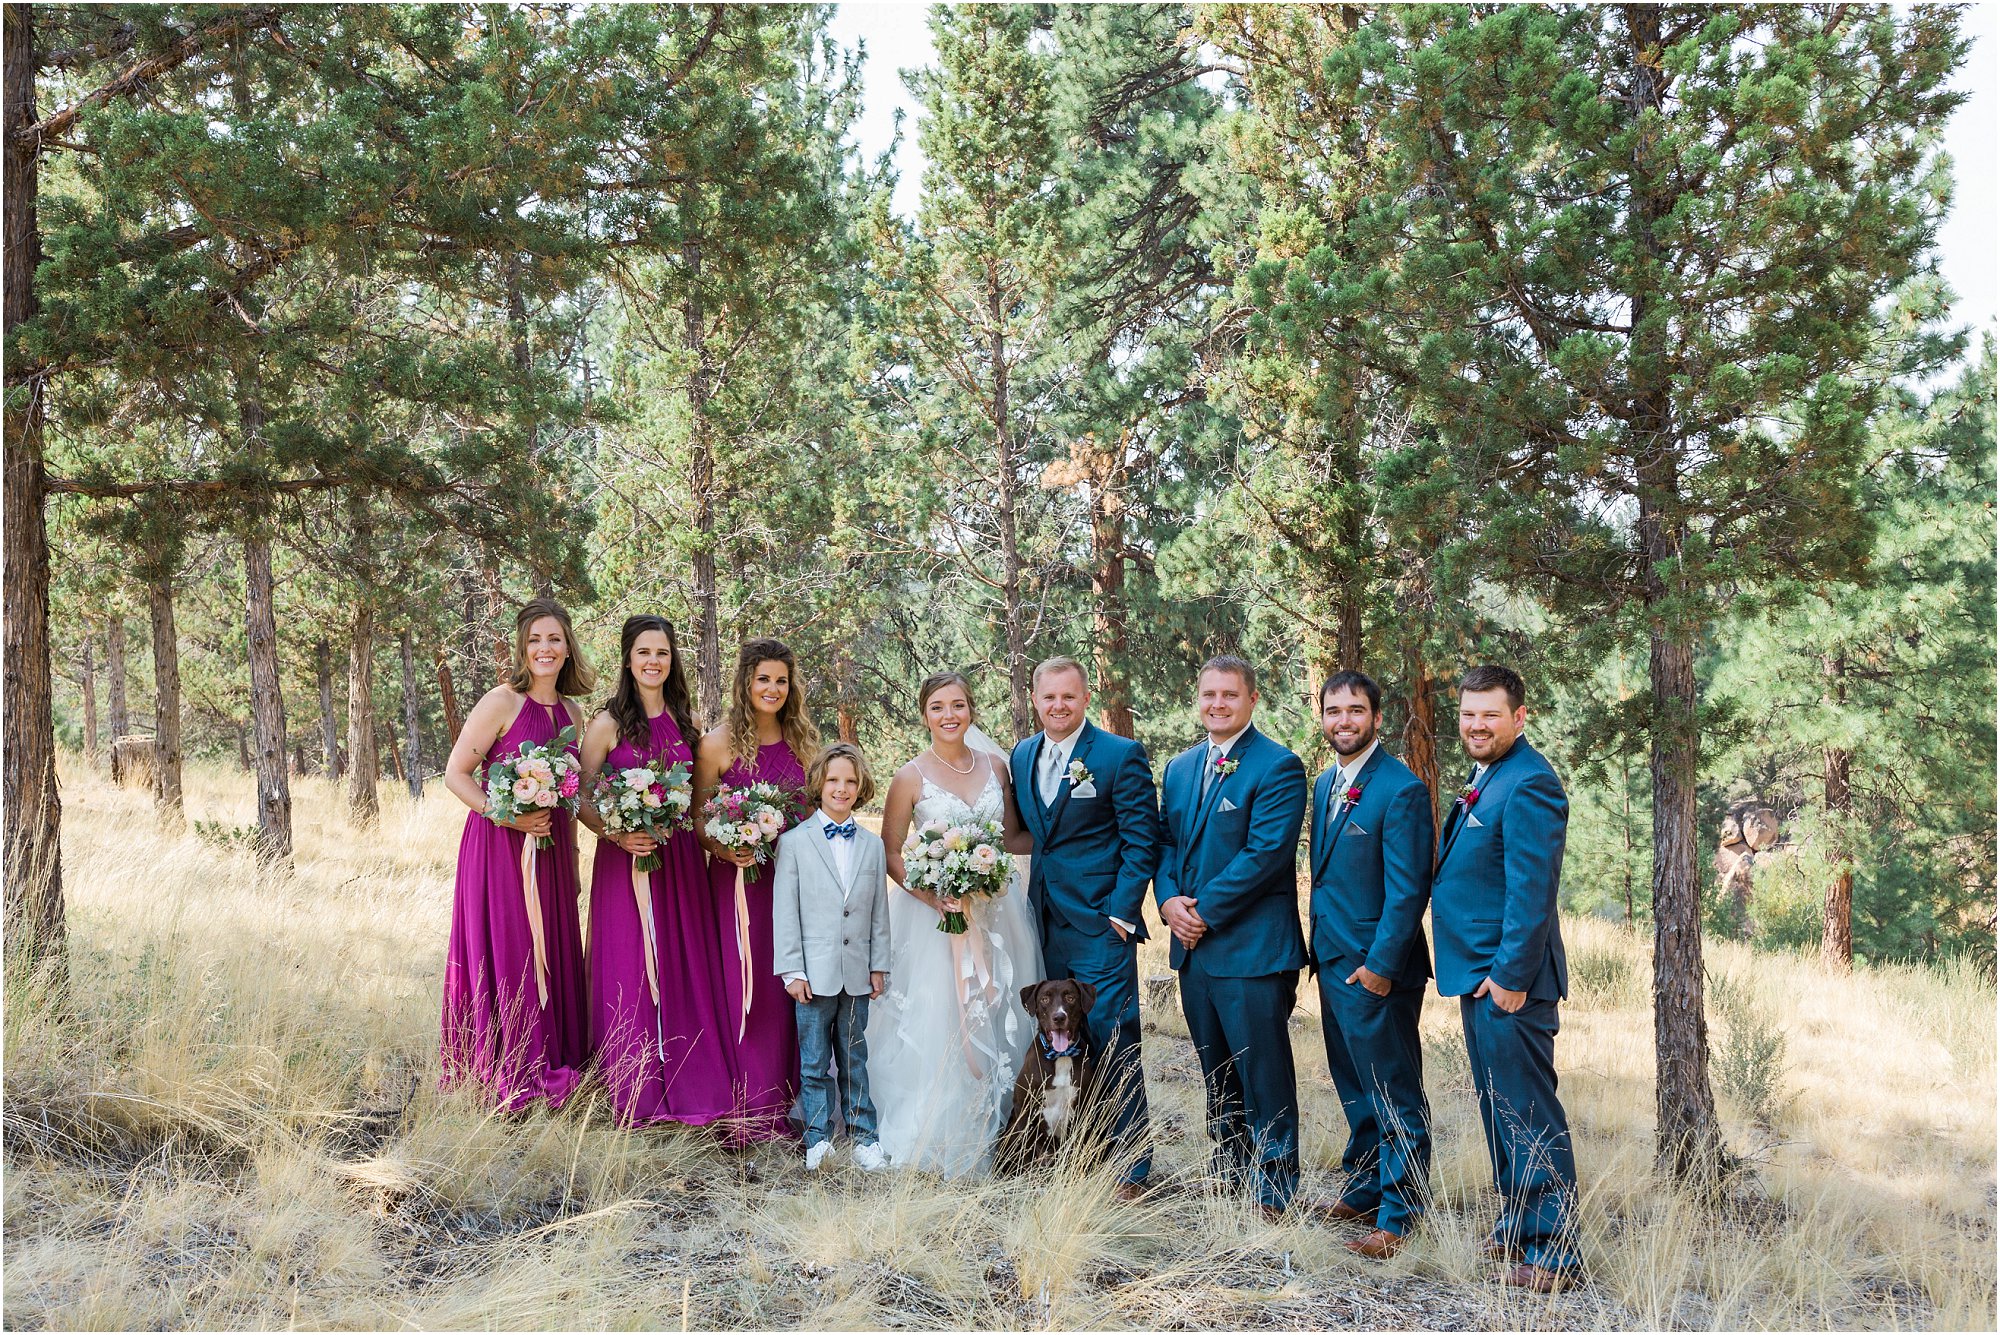 A good looking wedding party at this gorgeous outdoor rustic ranch wedding photographed by Bend wedding photographer Erica Swantek Photography. 